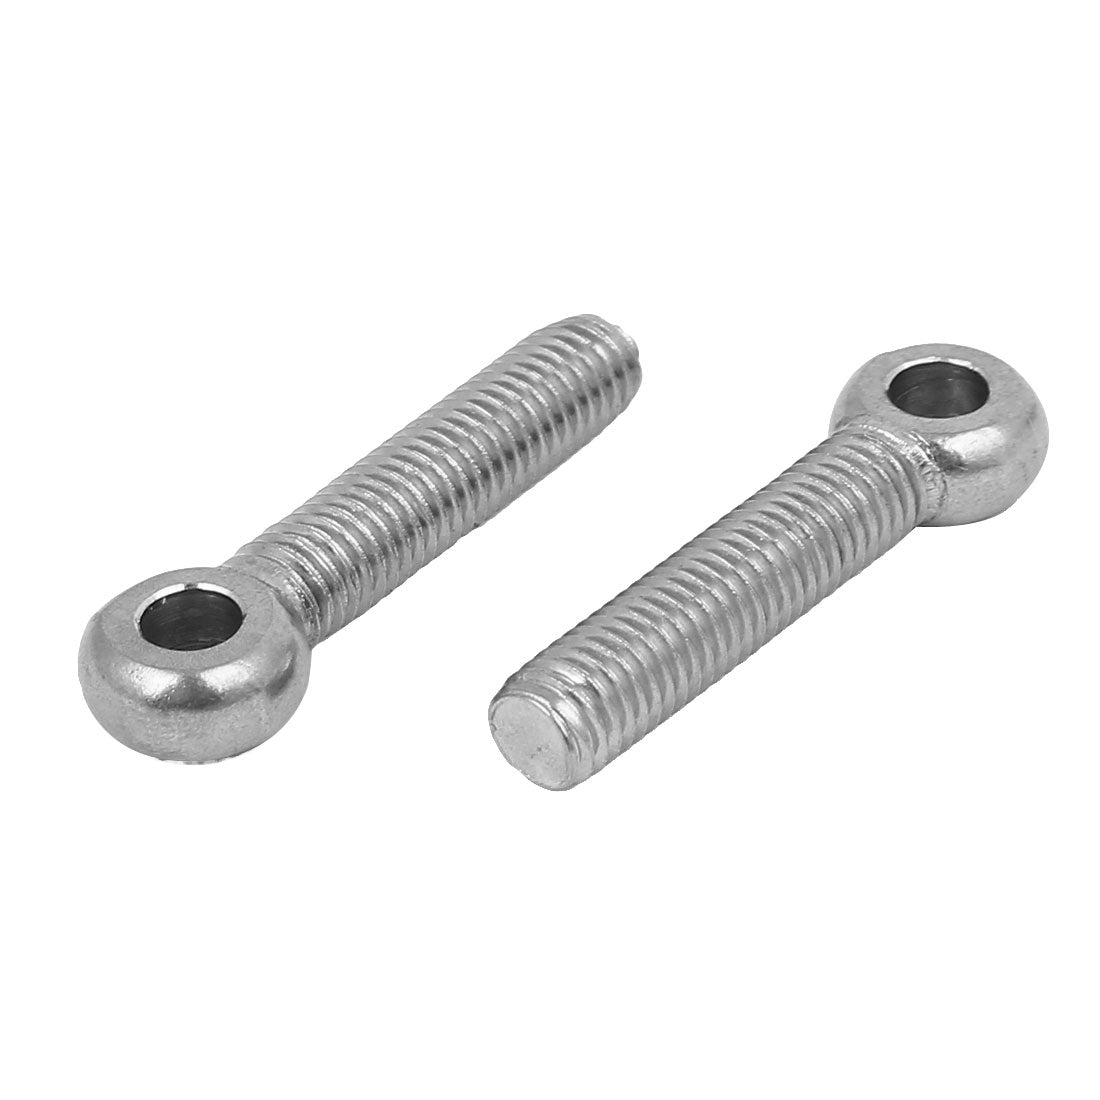 uxcell Uxcell M8 x 40mm 304 Stainless Steel Machine Shoulder Lift Eye Bolt Rigging 12pcs